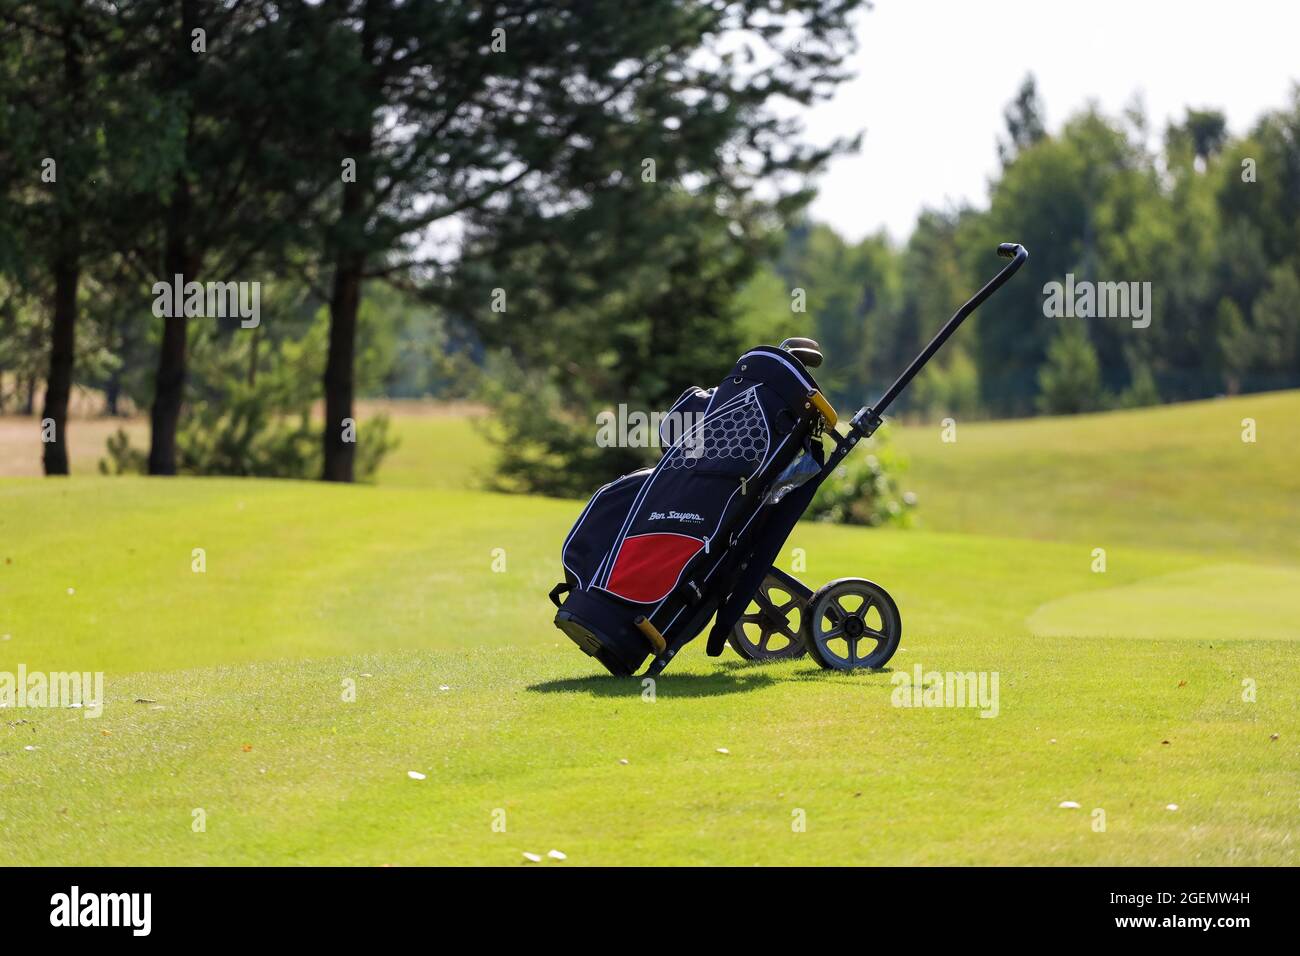 Minsk. Belarus - 25.07.2021 - Push-Pull Golf Carts on the field. Green  grass, trees. High quality photo Stock Photo - Alamy